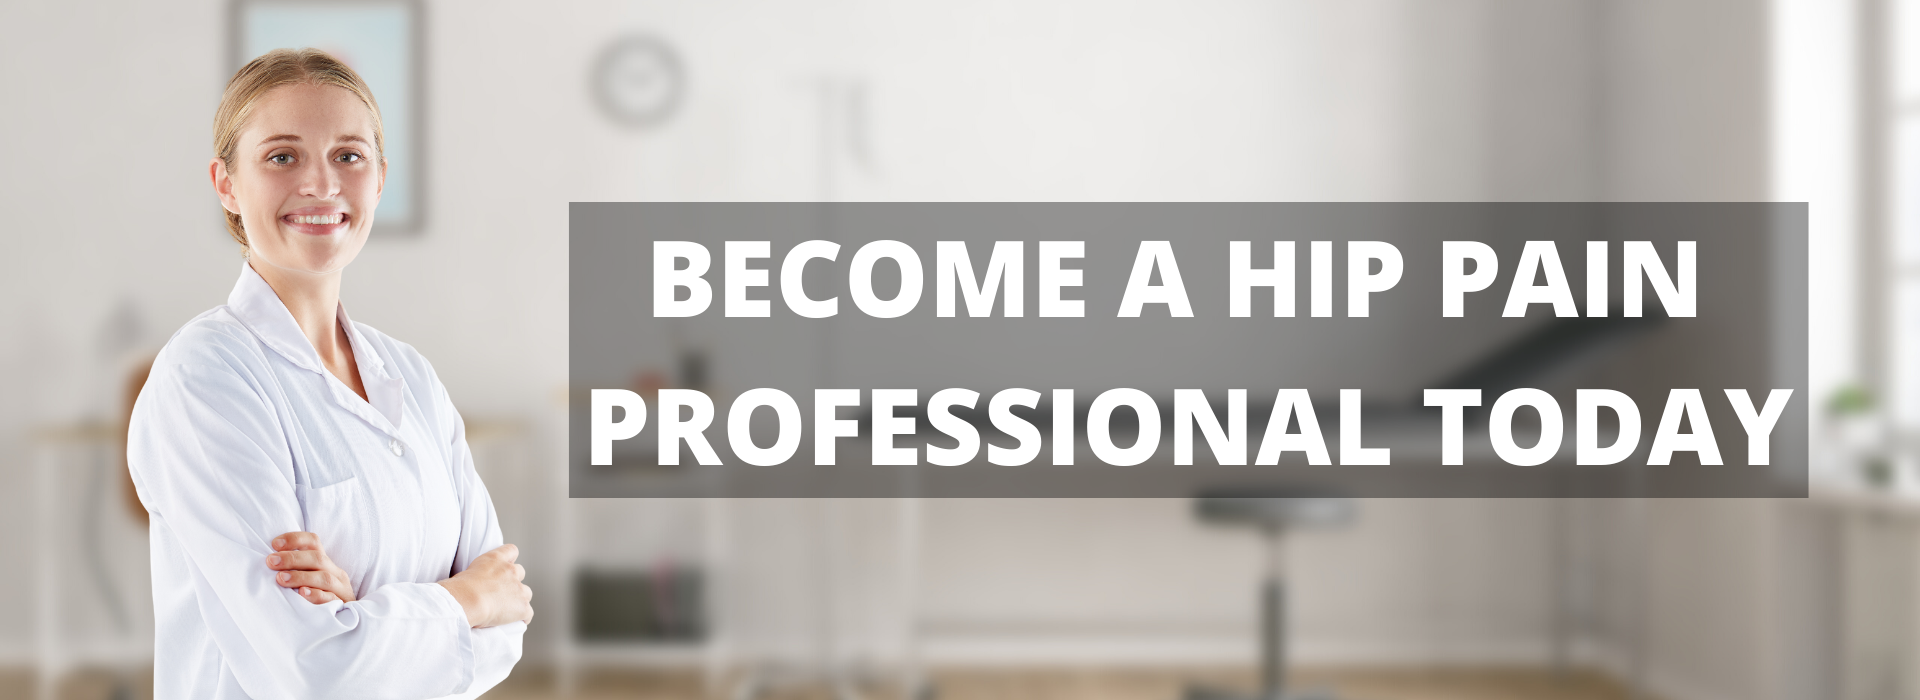 Become-a-HP-Professional-Banner-Image-2